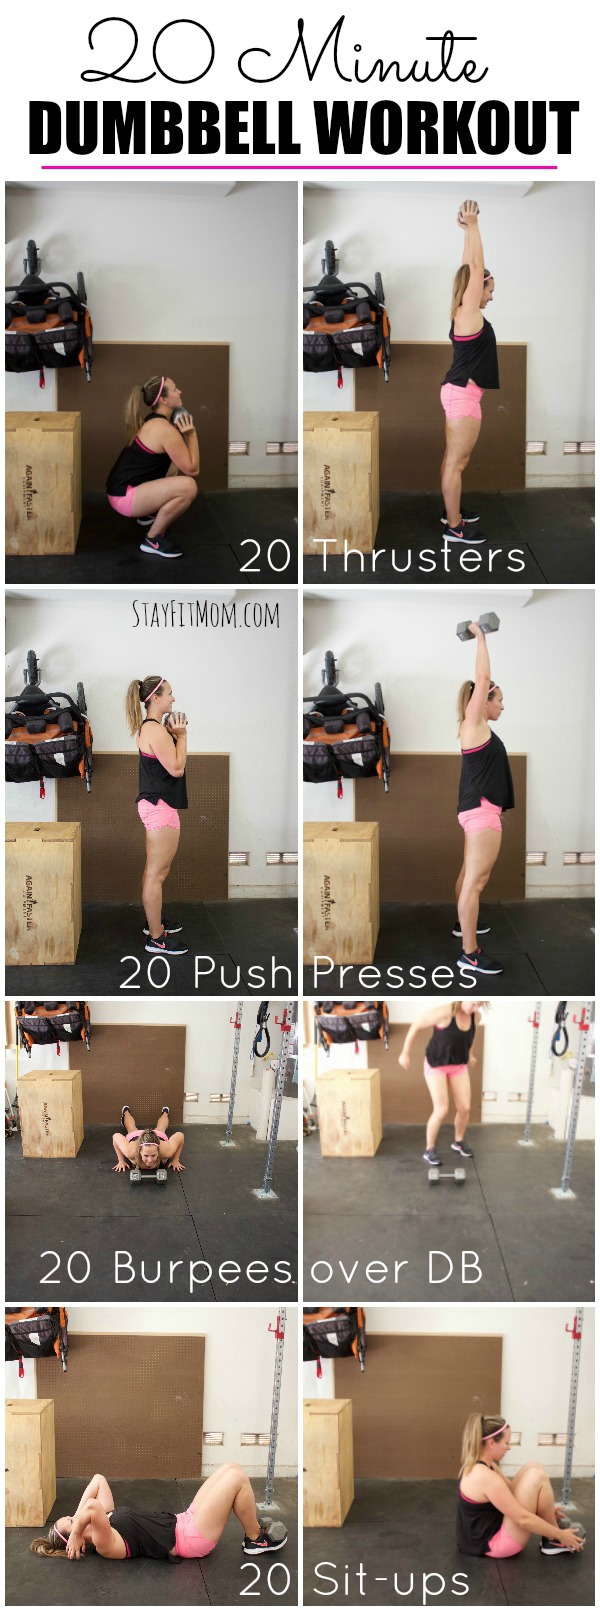 I love these high intensity quick workouts I can do at home!